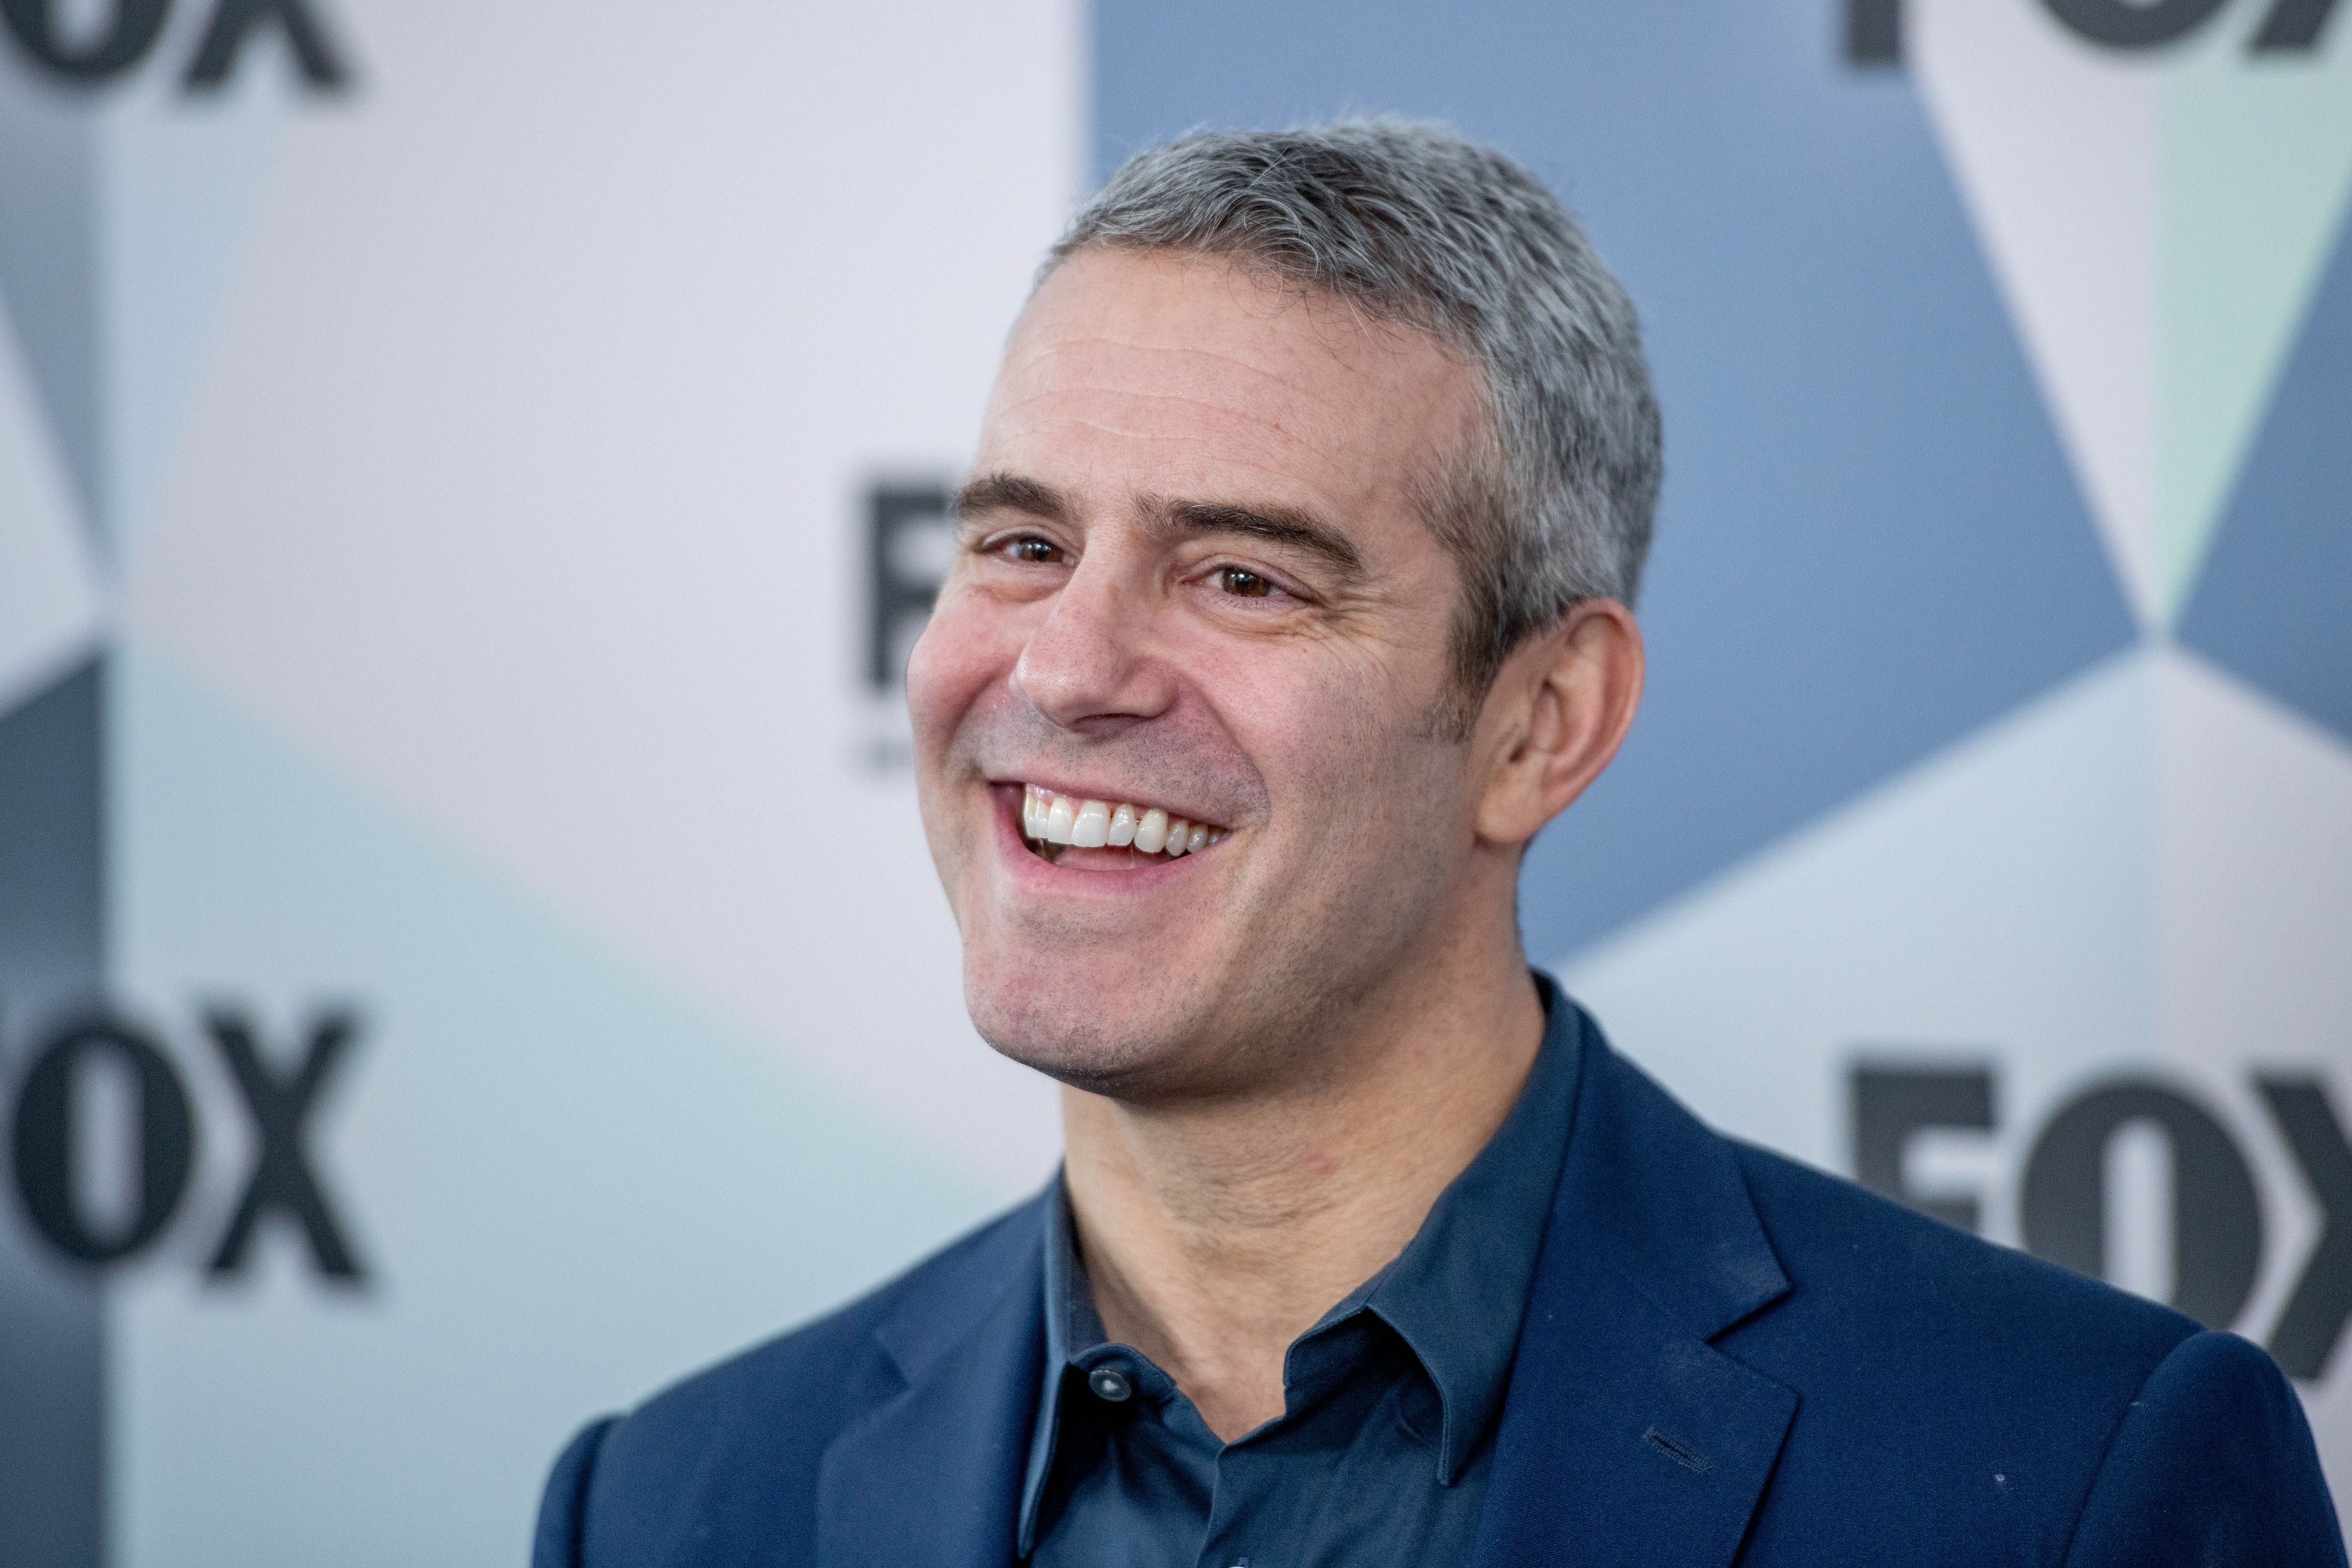 Andy Cohen during the 2018 Fox Network Upfront at Wollman Rink, Central Park on May 14, 2018. | Source: Getty Images